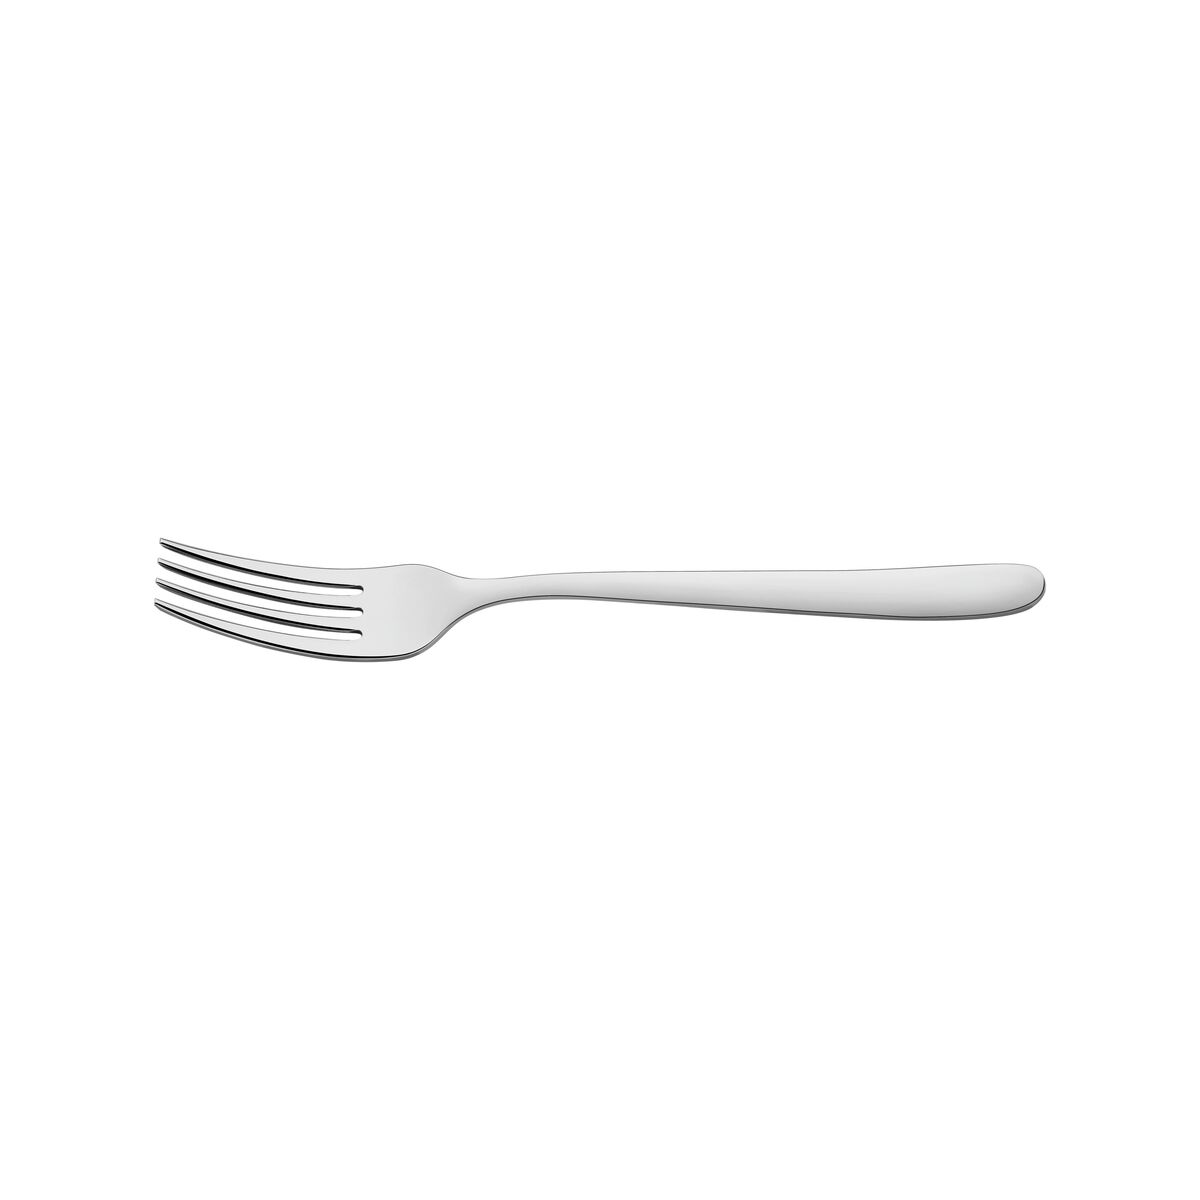 Tramontina Cannes stainless steel dinner fork